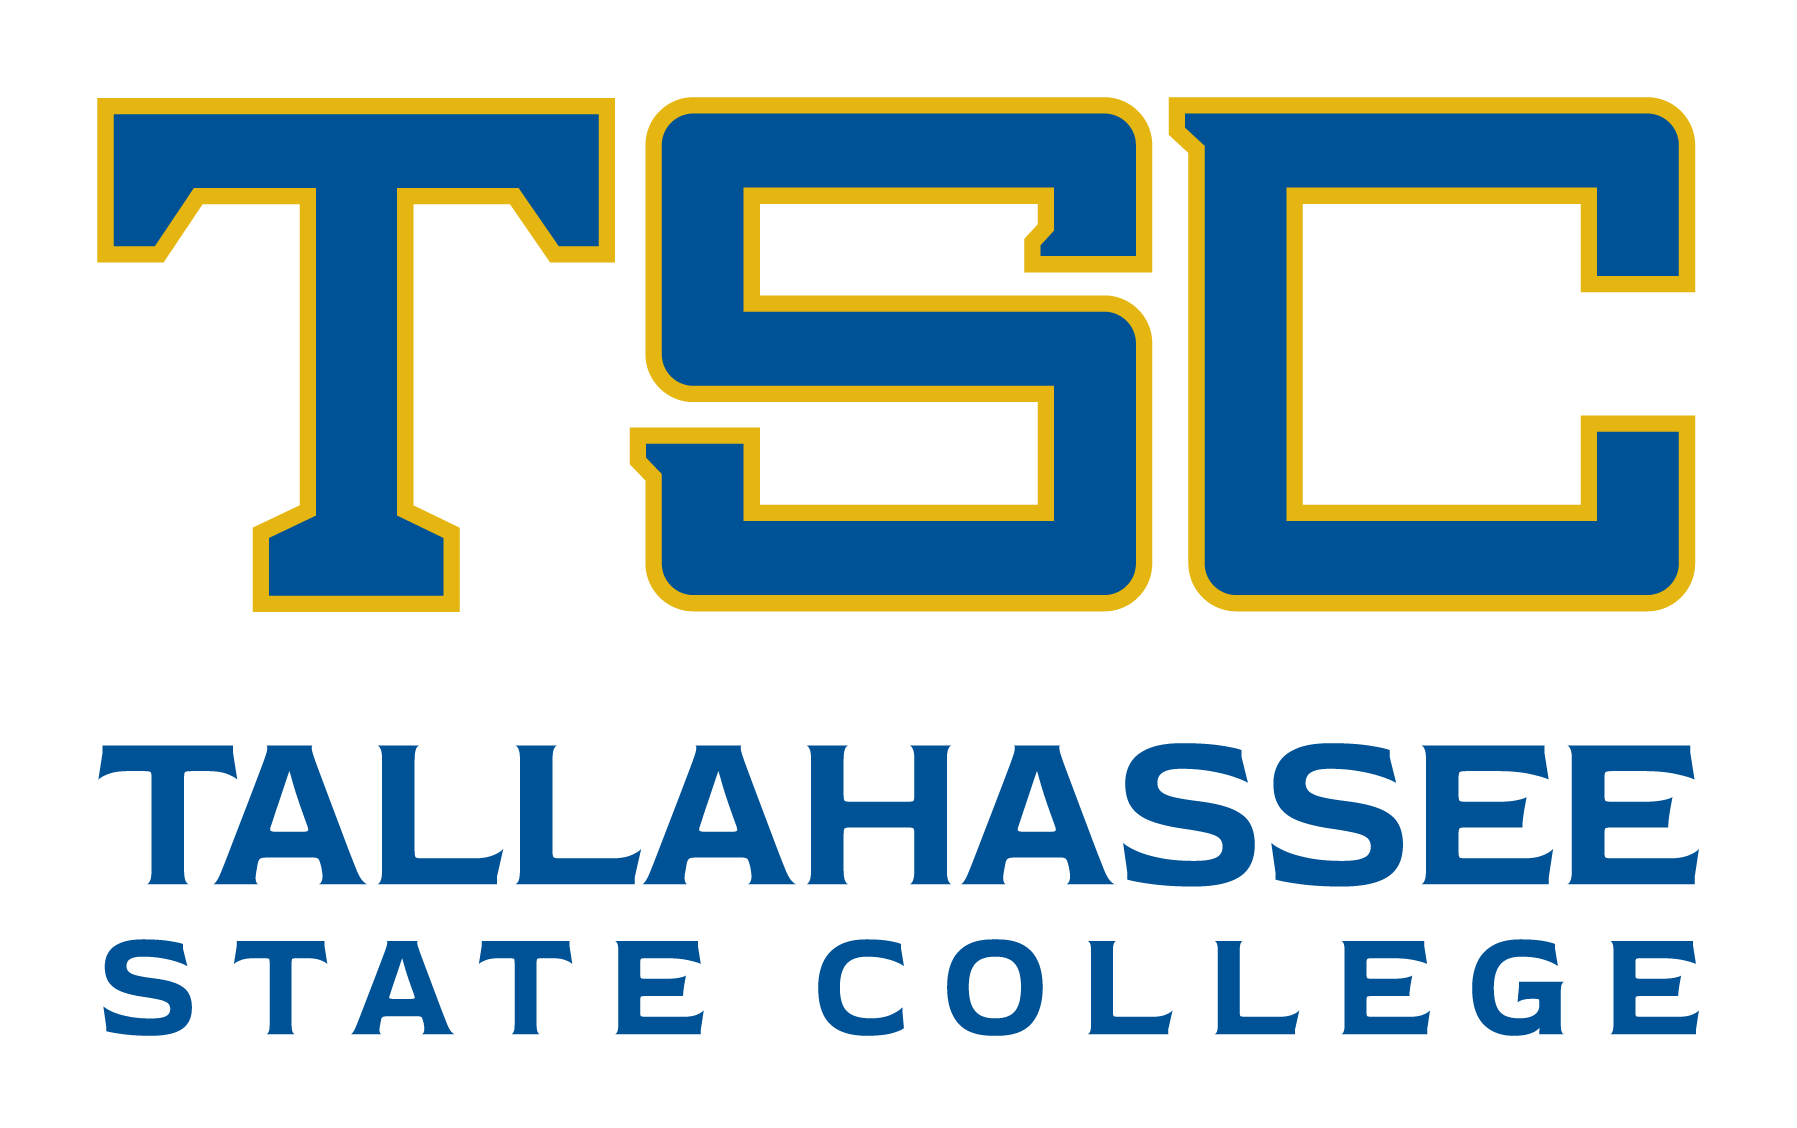 TSC Tallahassee State College